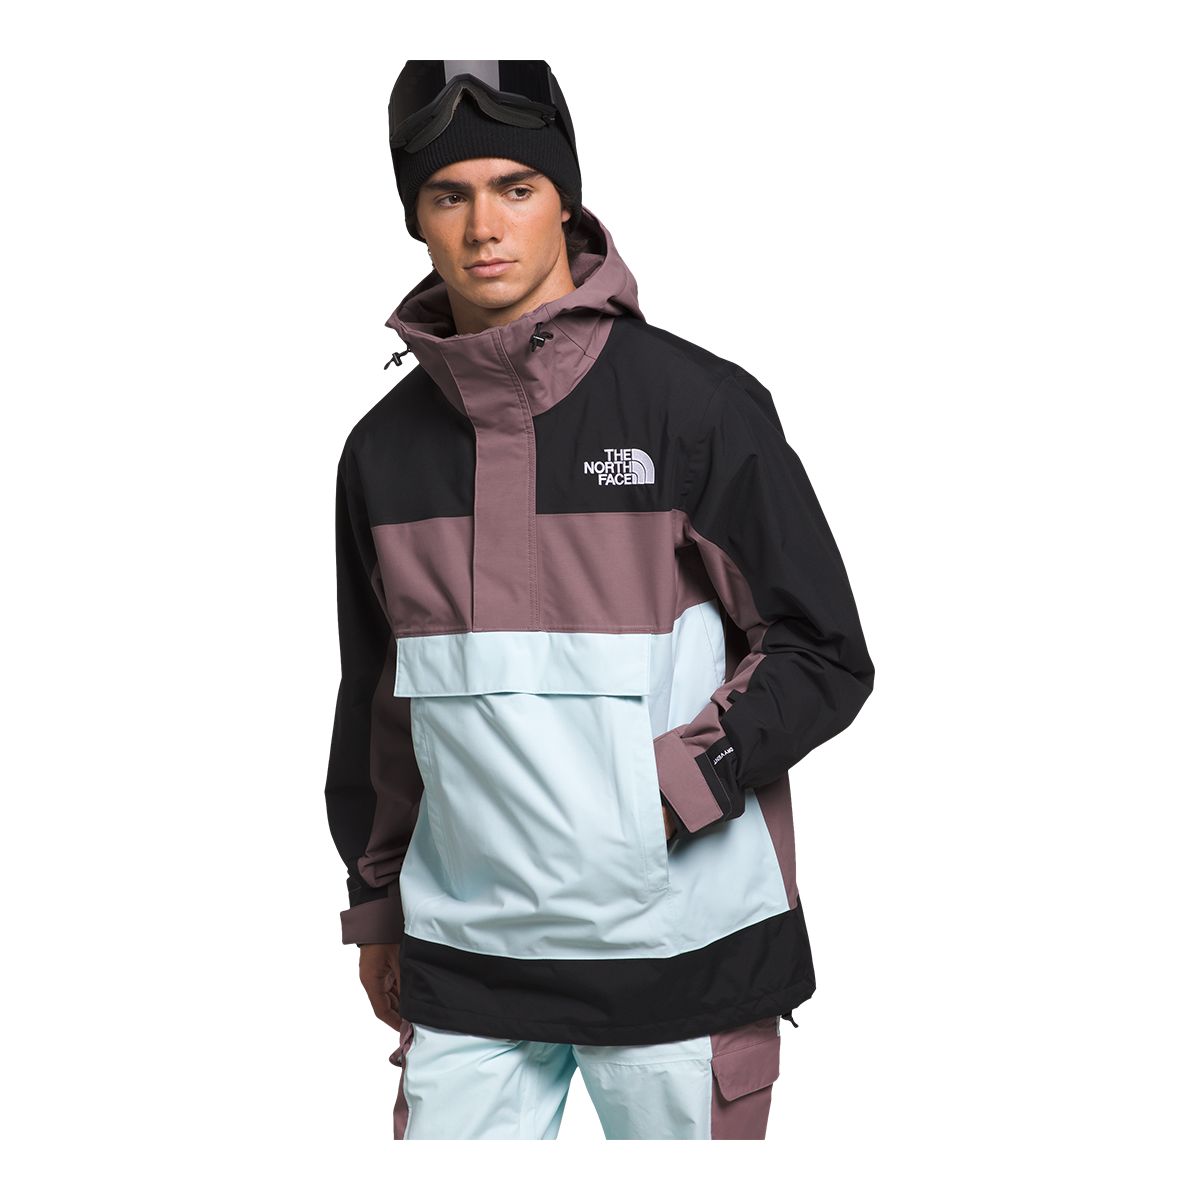 Image of The North Face Men's Drift View Jacket